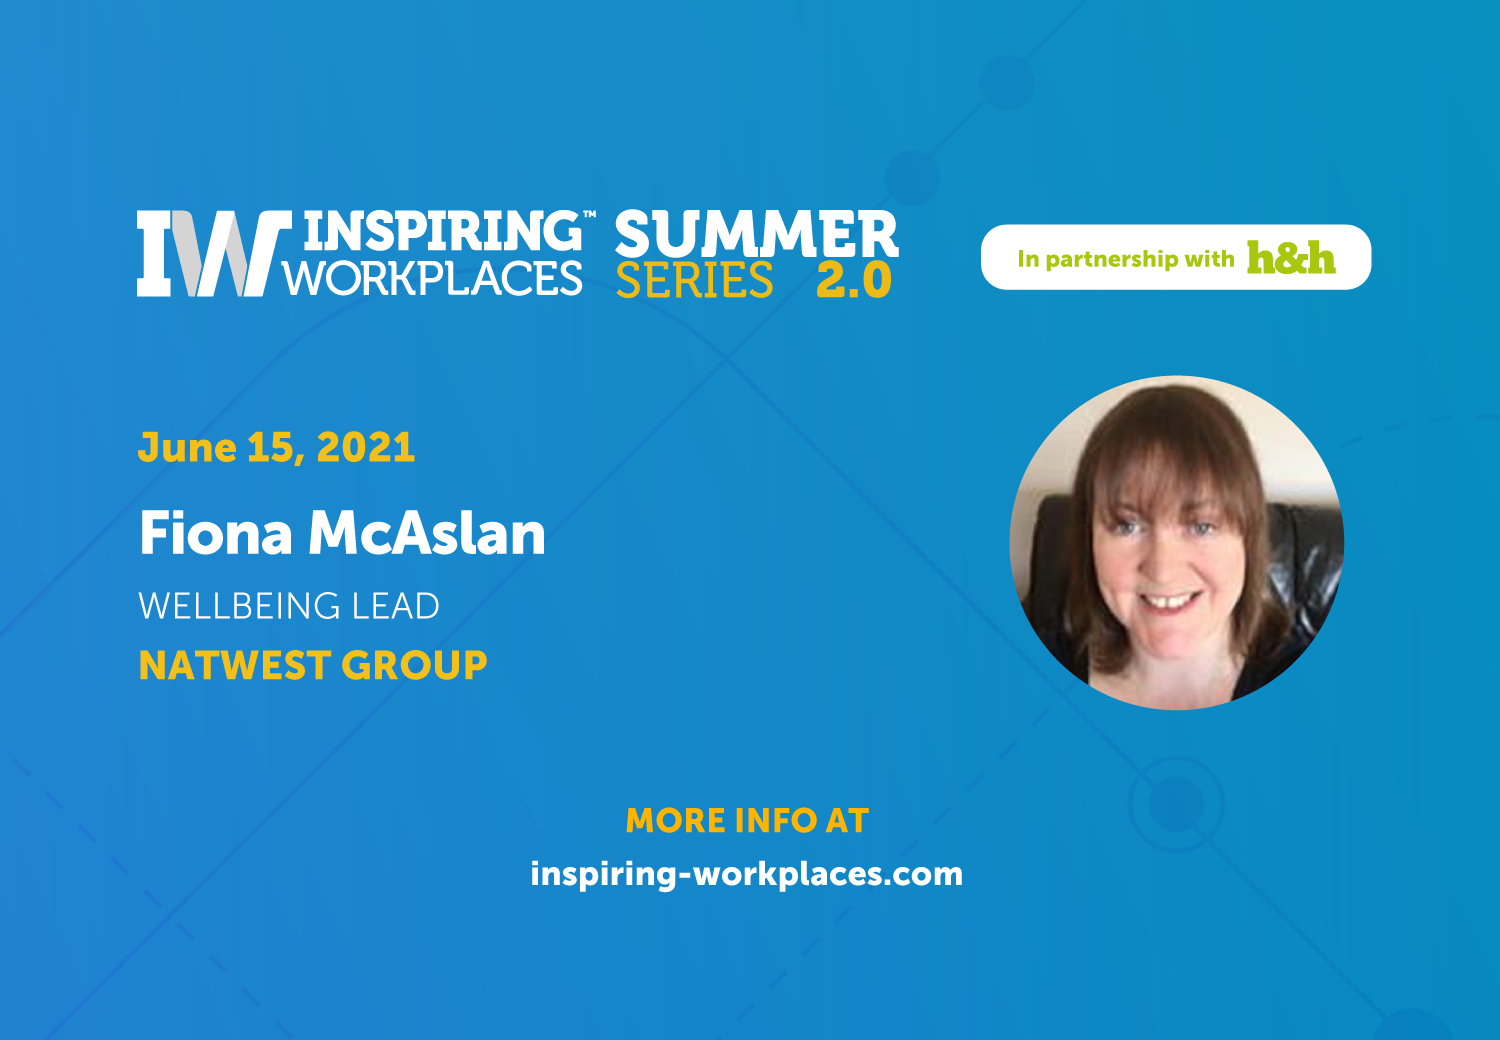 On Demand Video: The role of Wellbeing as we move to a new way of working | Fiona McAslan